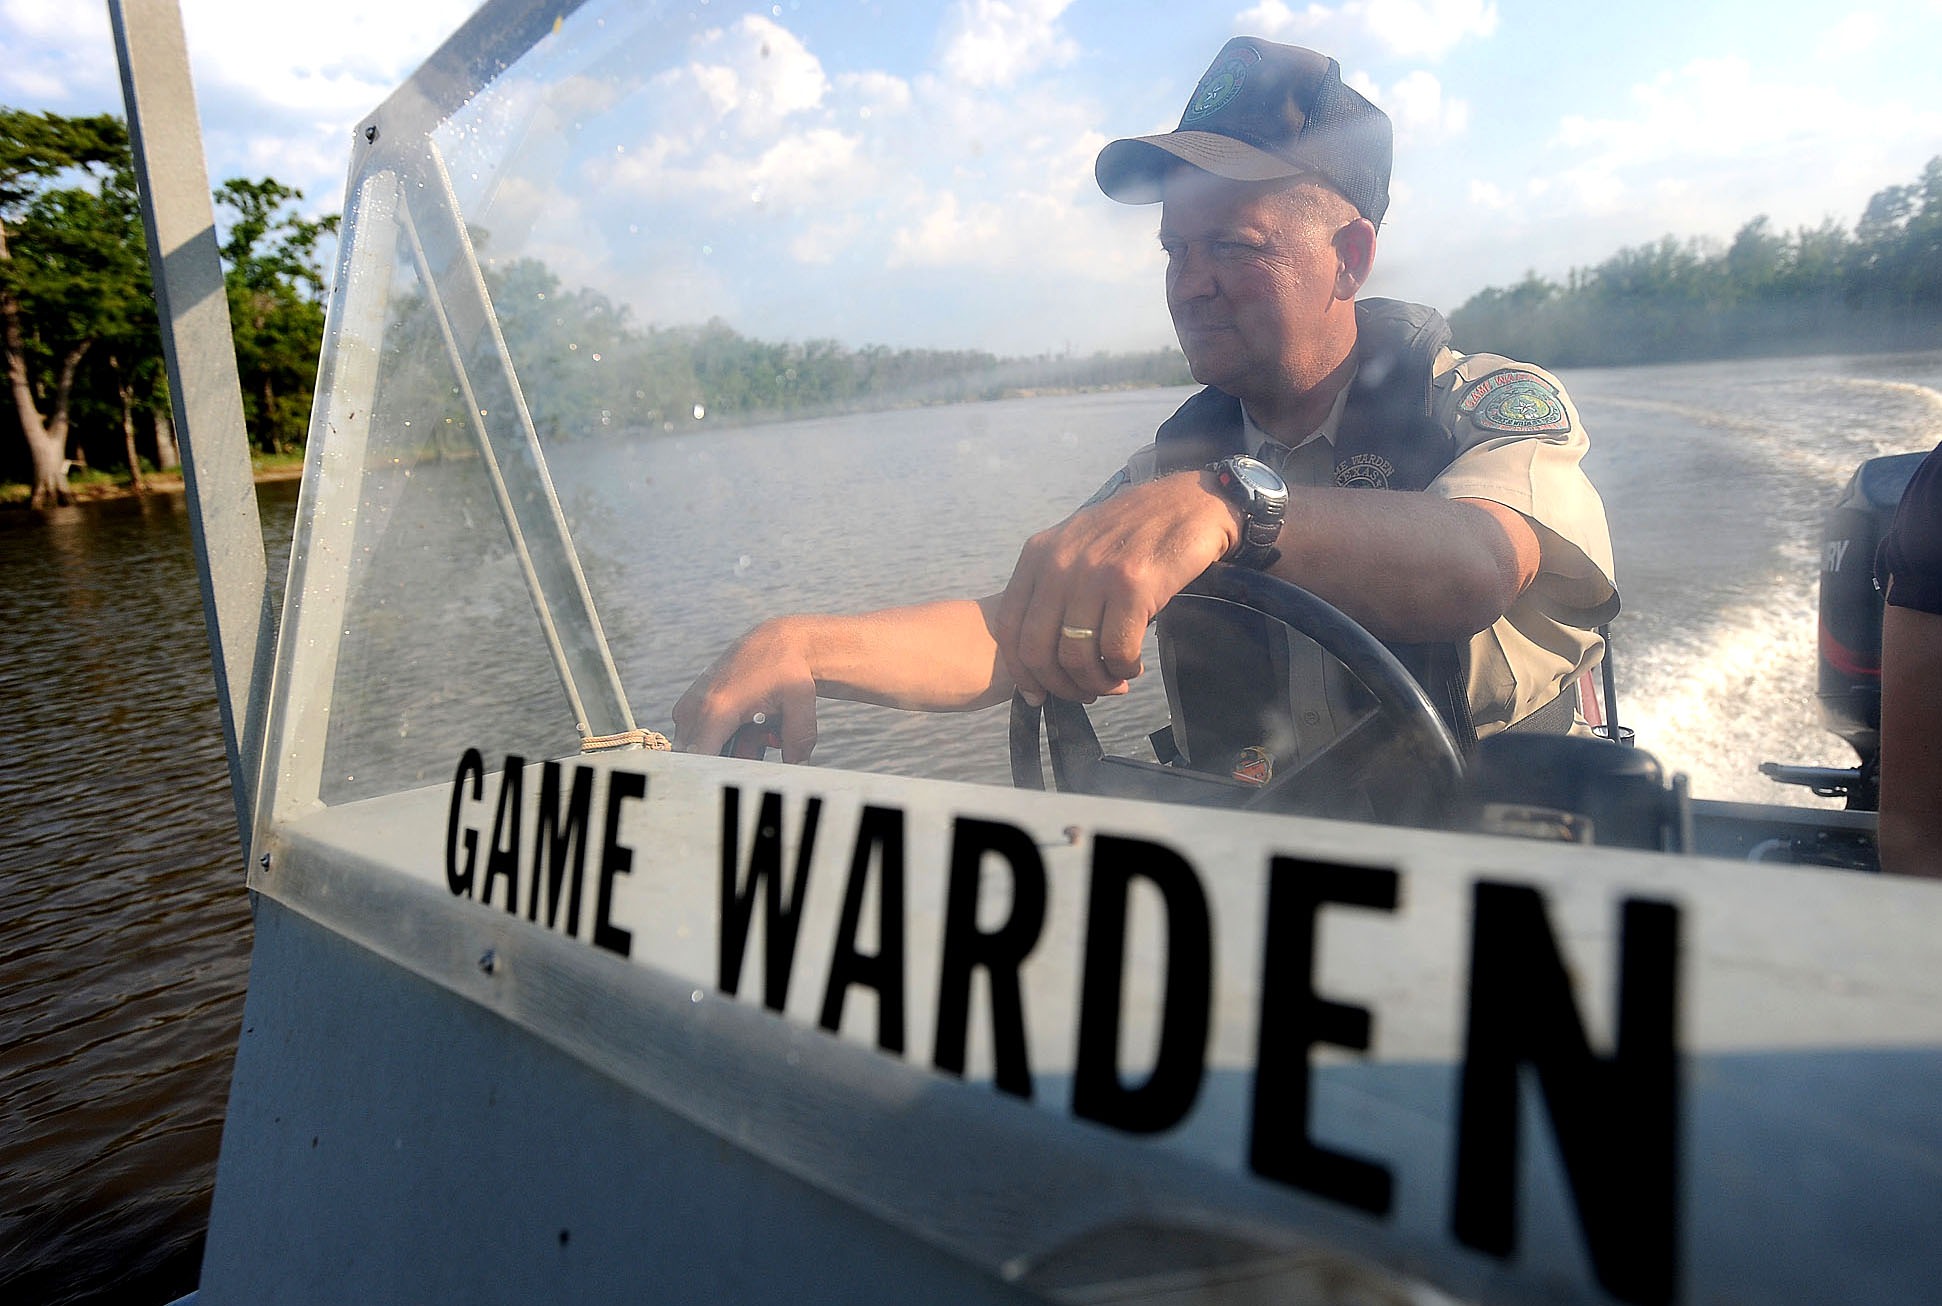 Texas Game Wardens - TPWD